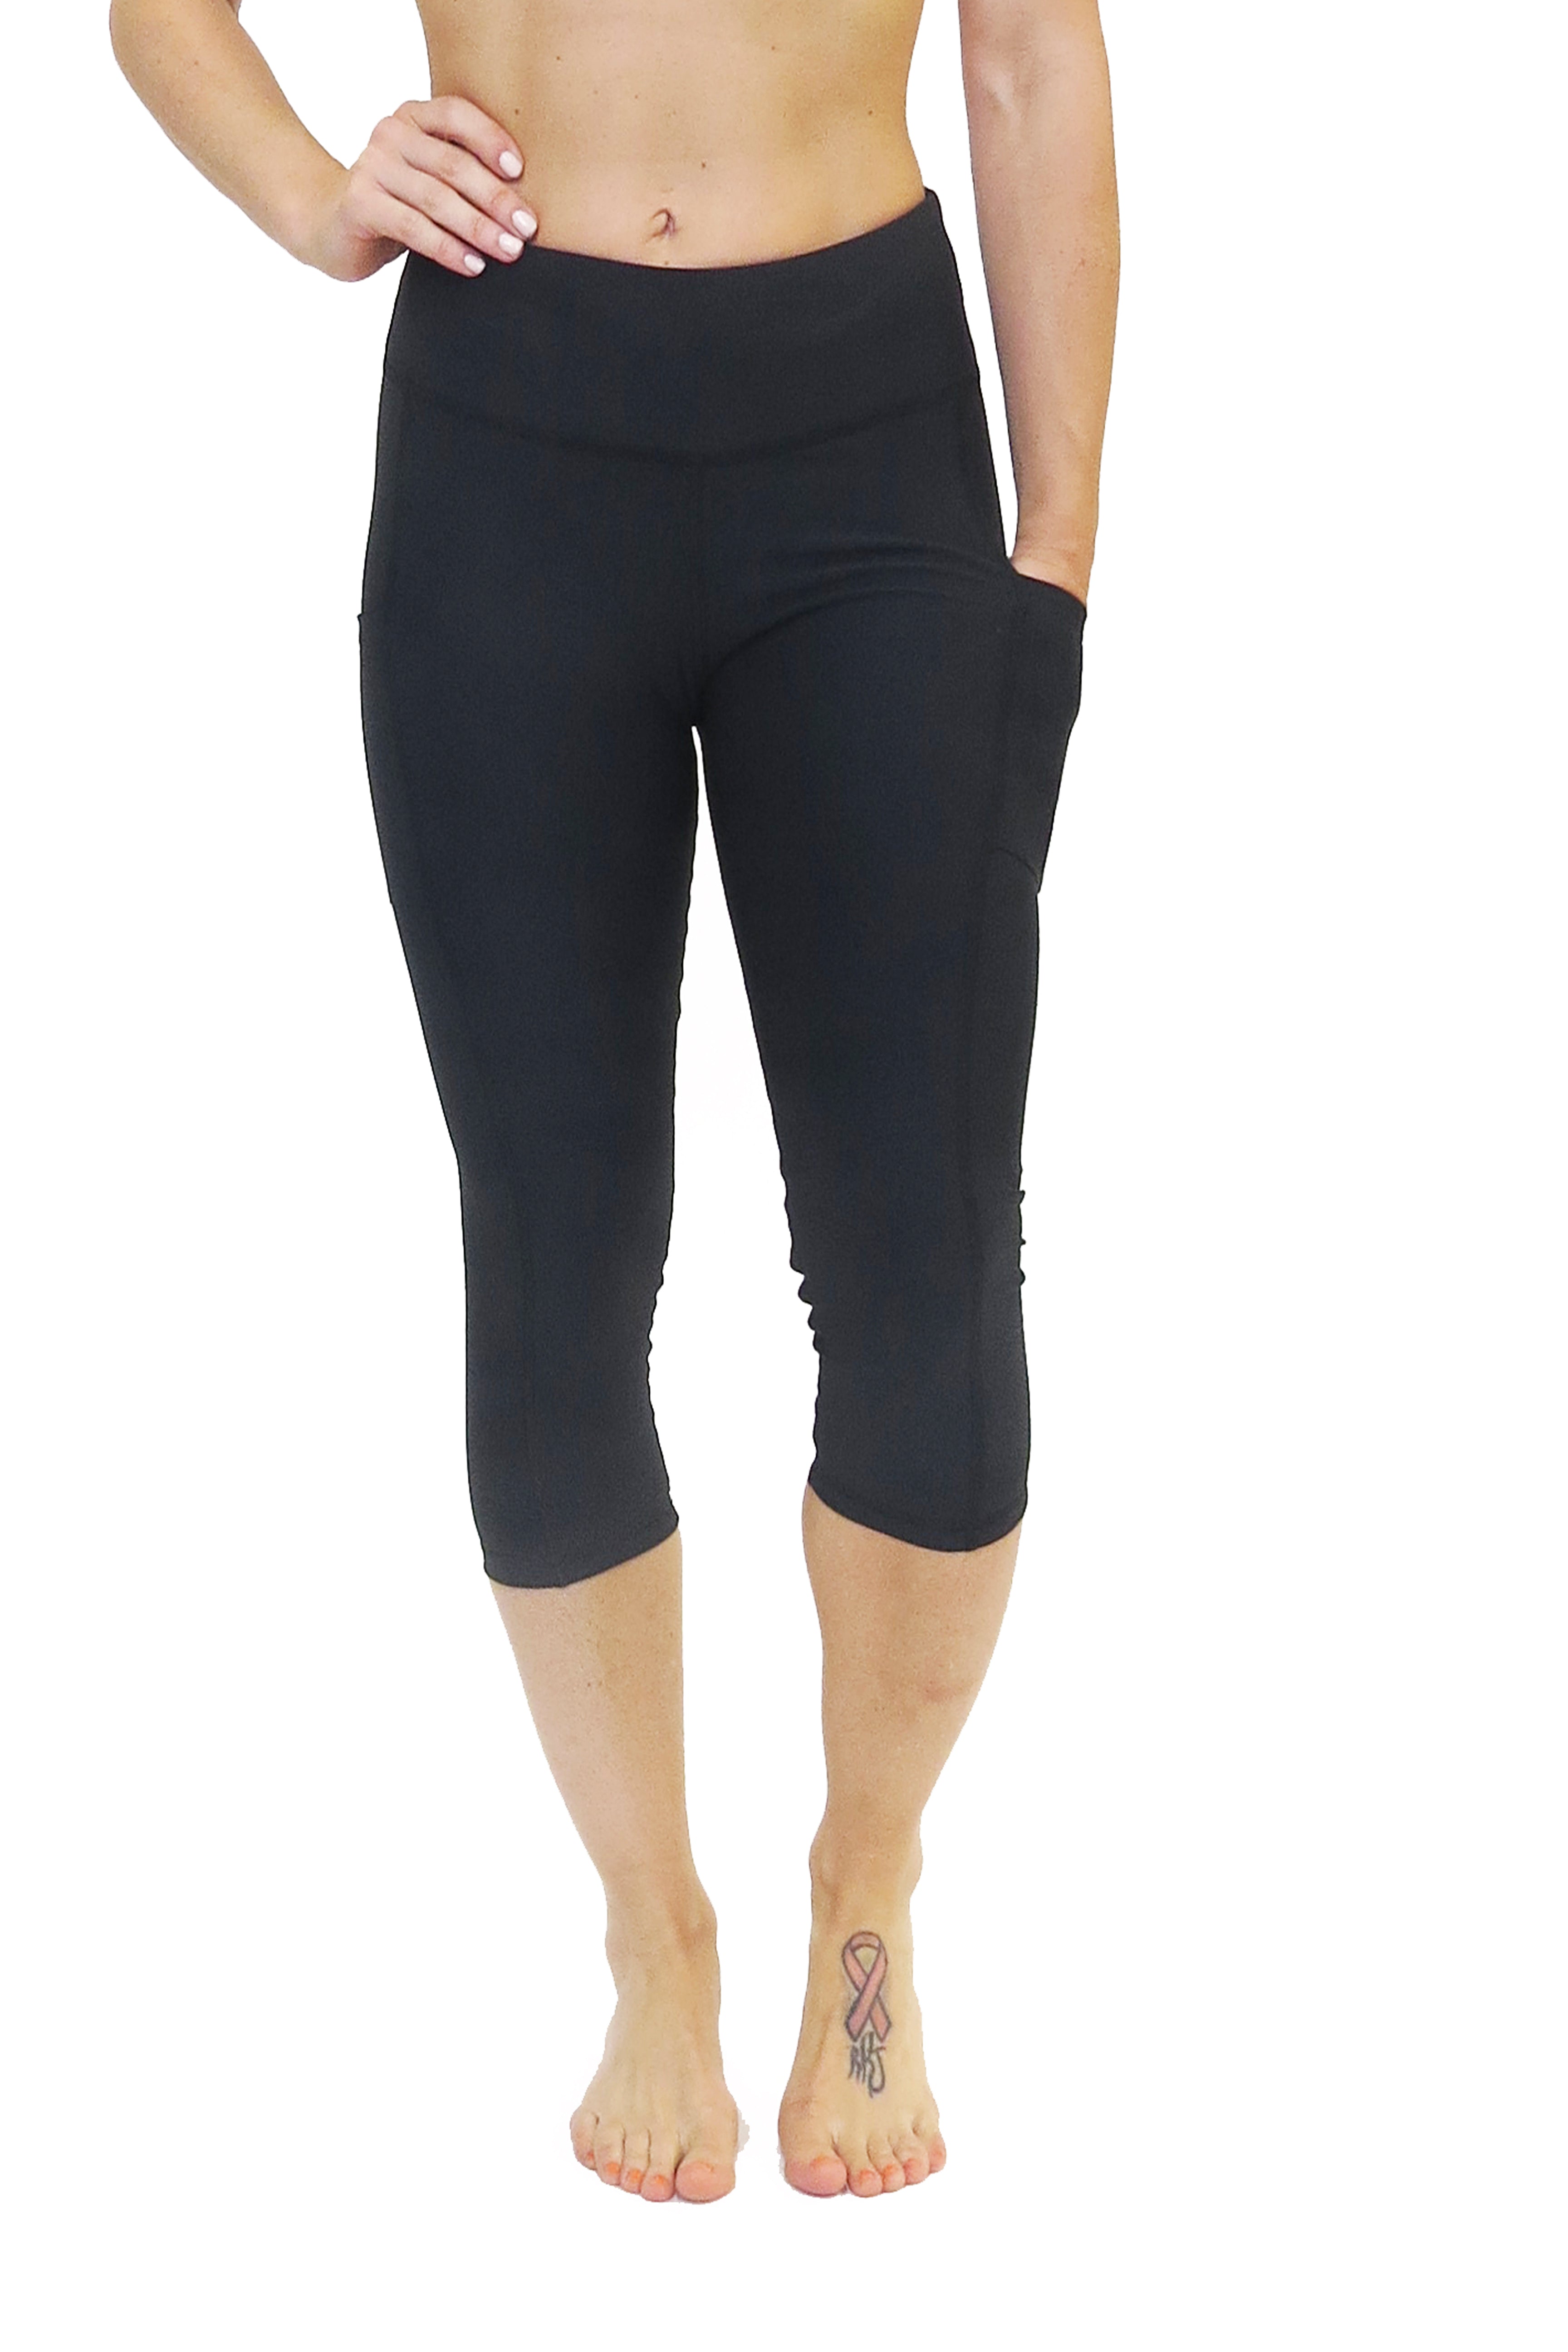 Classic Black Legging Style Capris With Pockets